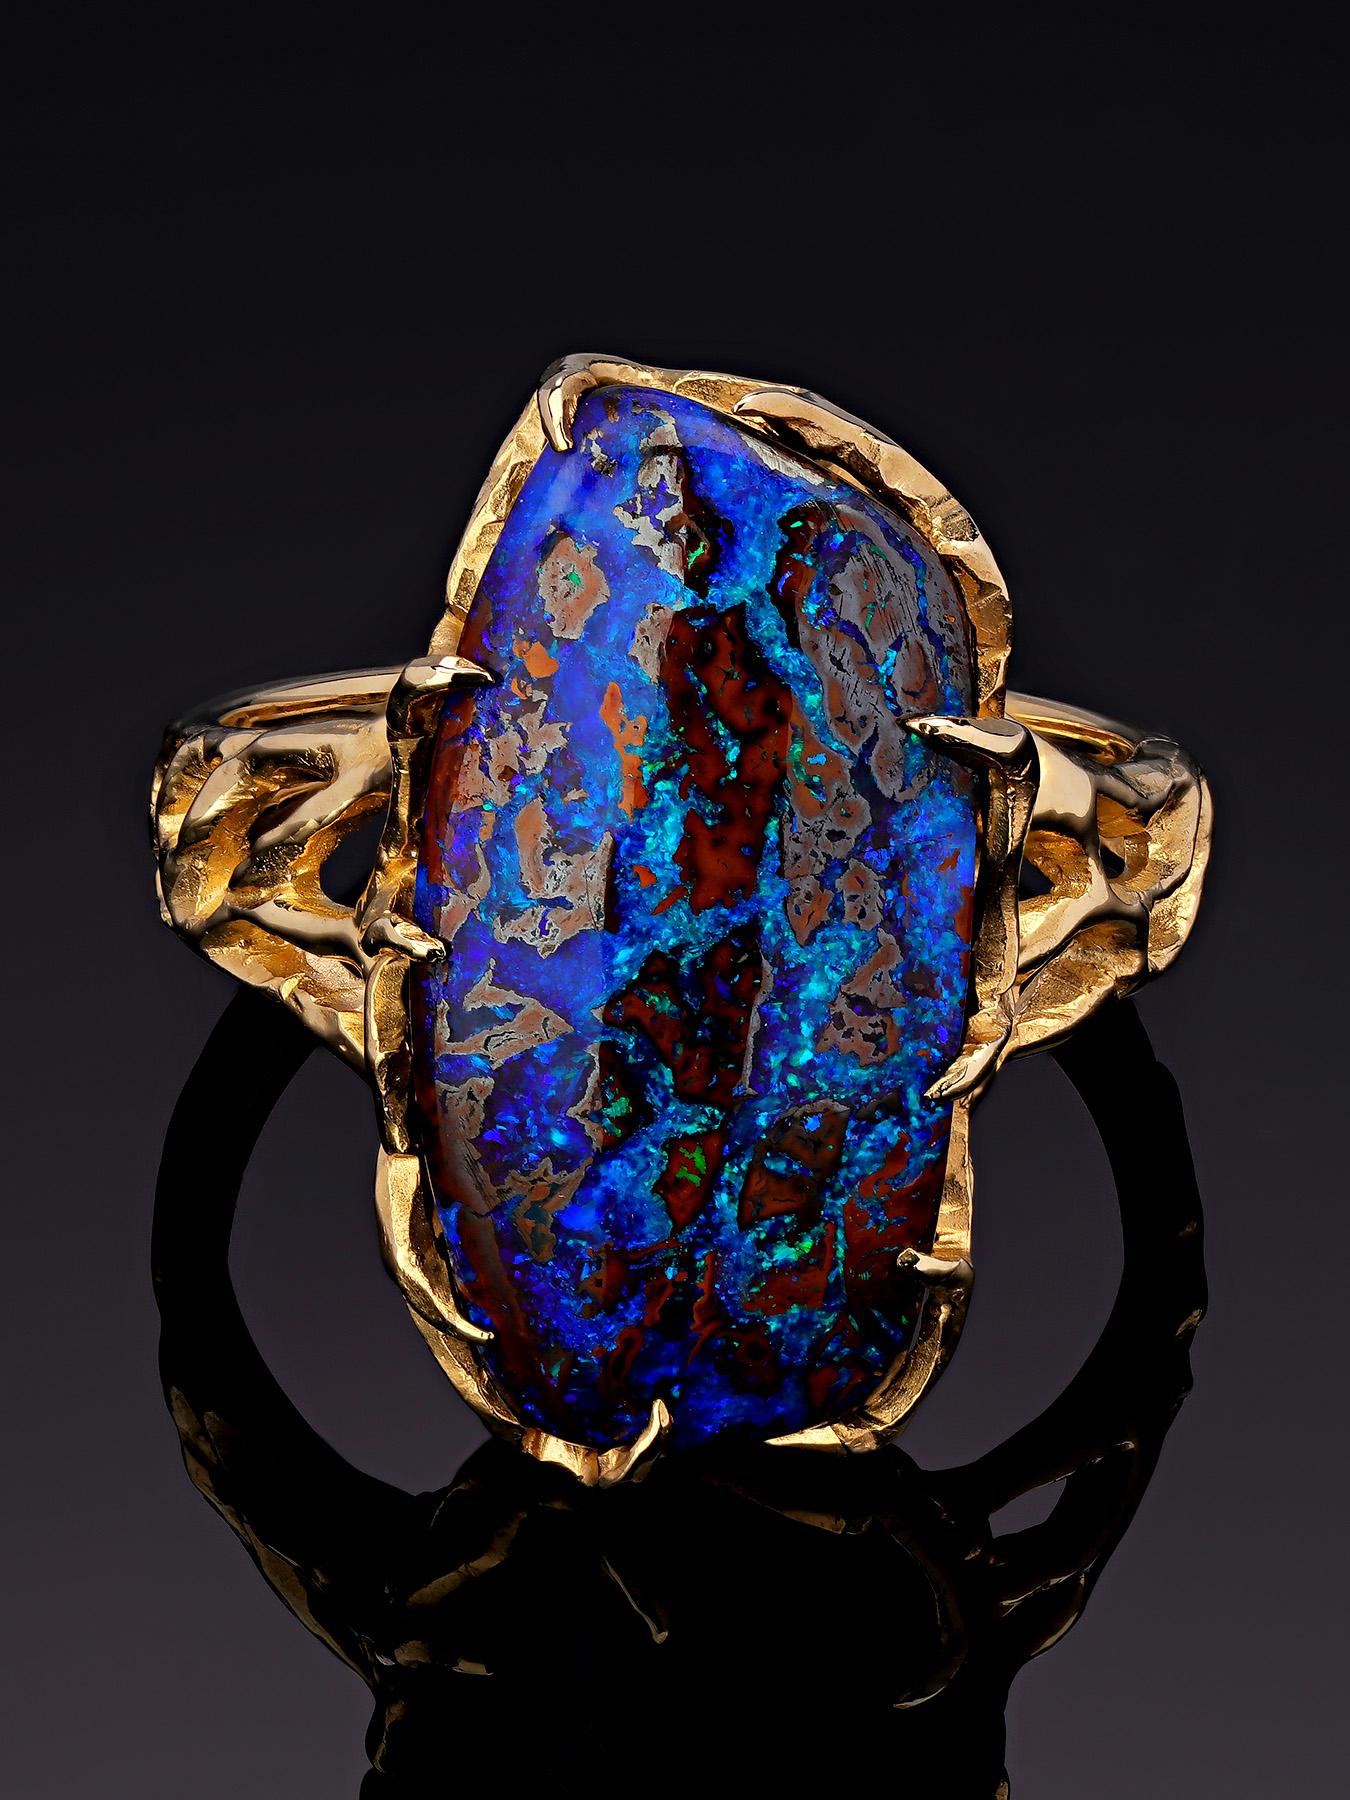 Vrubel collection - Boulder Opal ring in 14K yellow gold 
opal origin - Australia
opal measurements - 0,24 х 0.0,43 х 0,79 in / 6 х 11 х 20 mm
stone weight - 12.70 carats
ring weight - 6.89 grams
ring size - 7.5 US 


We ship our jewelry worldwide –